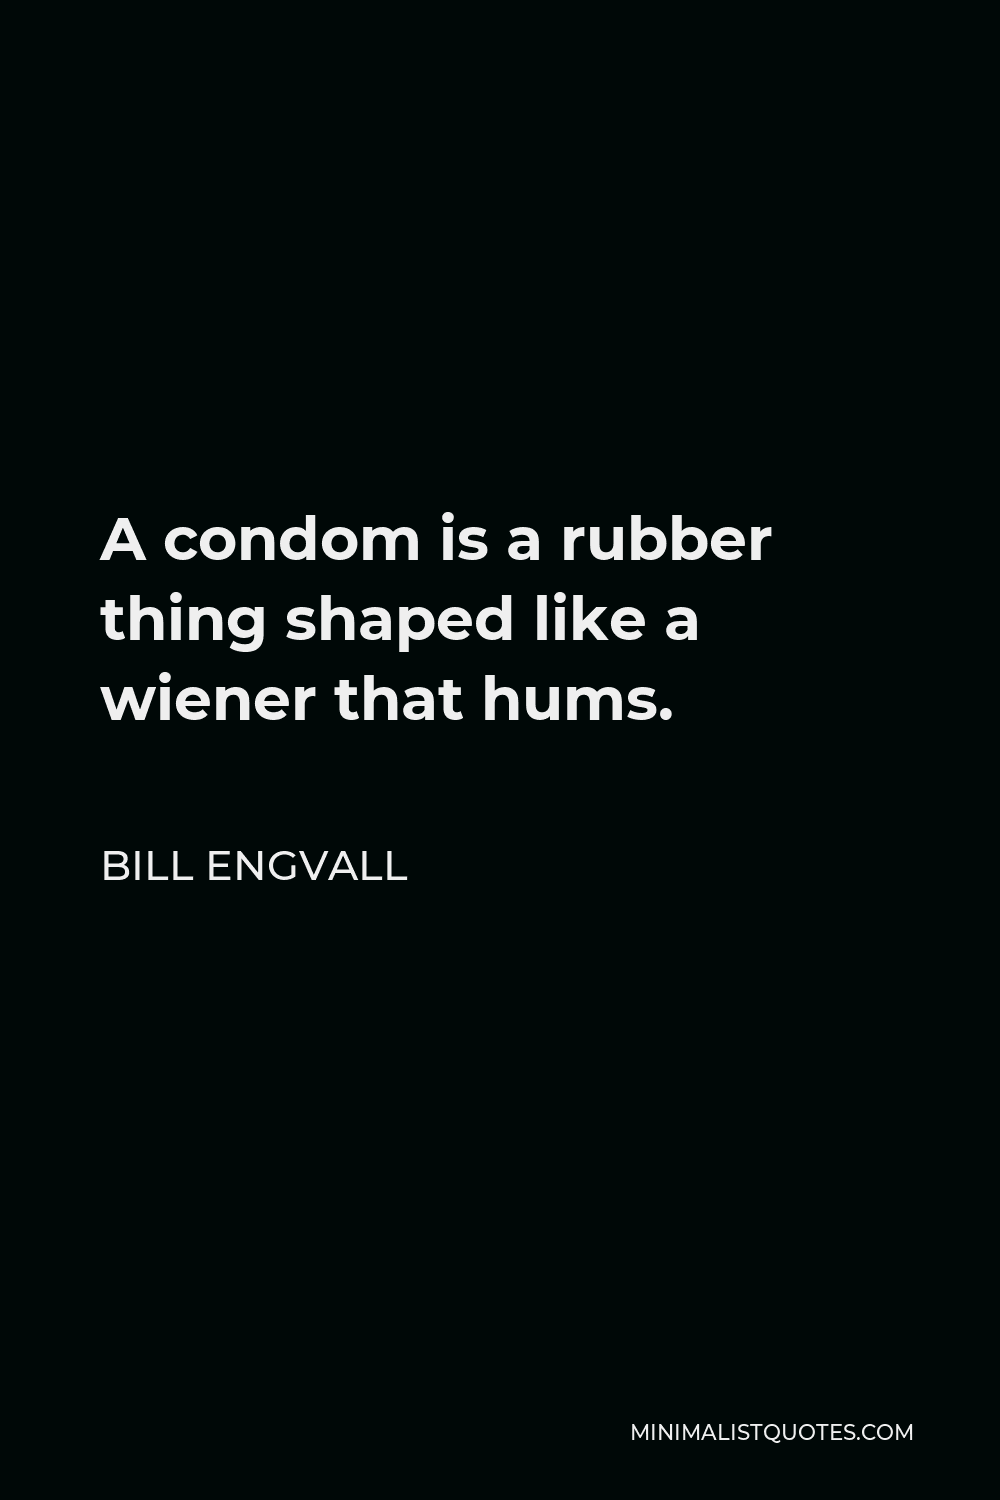 Bill Engvall Quote - A condom is a rubber thing shaped like a wiener that hums.